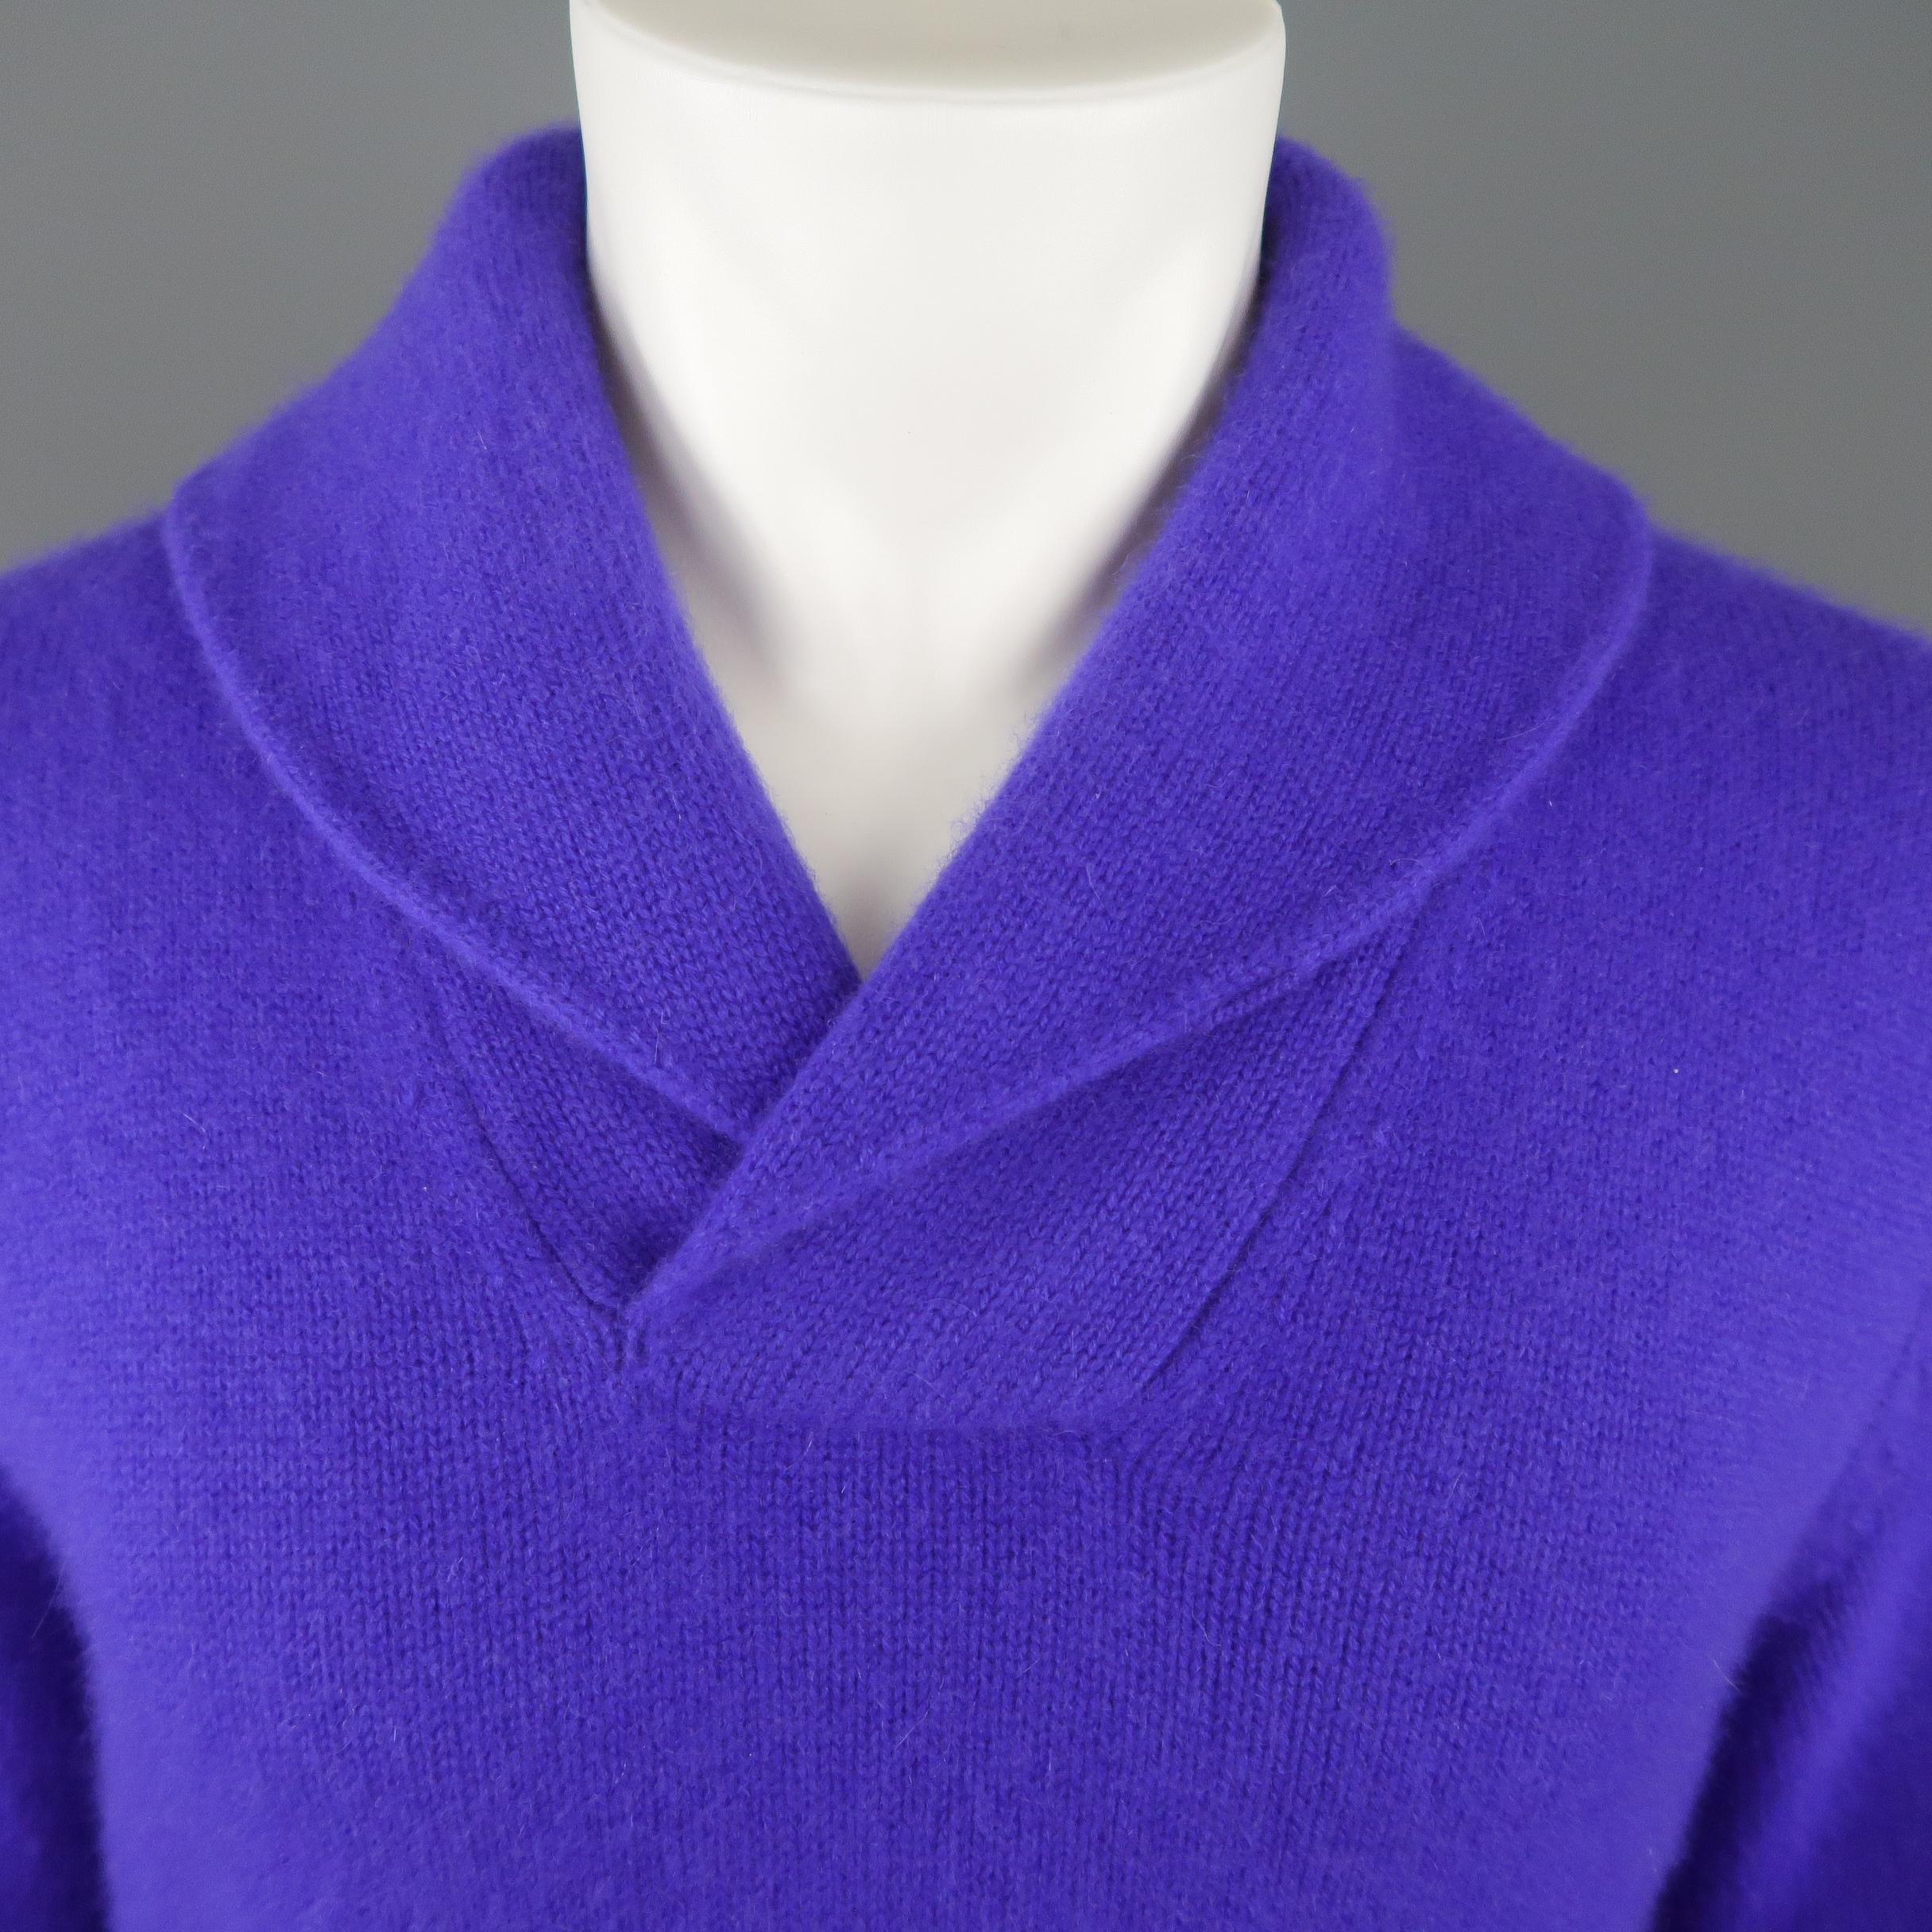 POLO RALPH LAUREN  pullover sweater comes in purple cashmere  knit with a wrapped shawl collar and ribbed cuffs.
 
Excellent Pre-Owned Condition.
Marked: M
 
Measurements:
 
Shoulder: 19 in.
Chest: 42 in.
Sleeve: 25 in.
Length: 26 in.